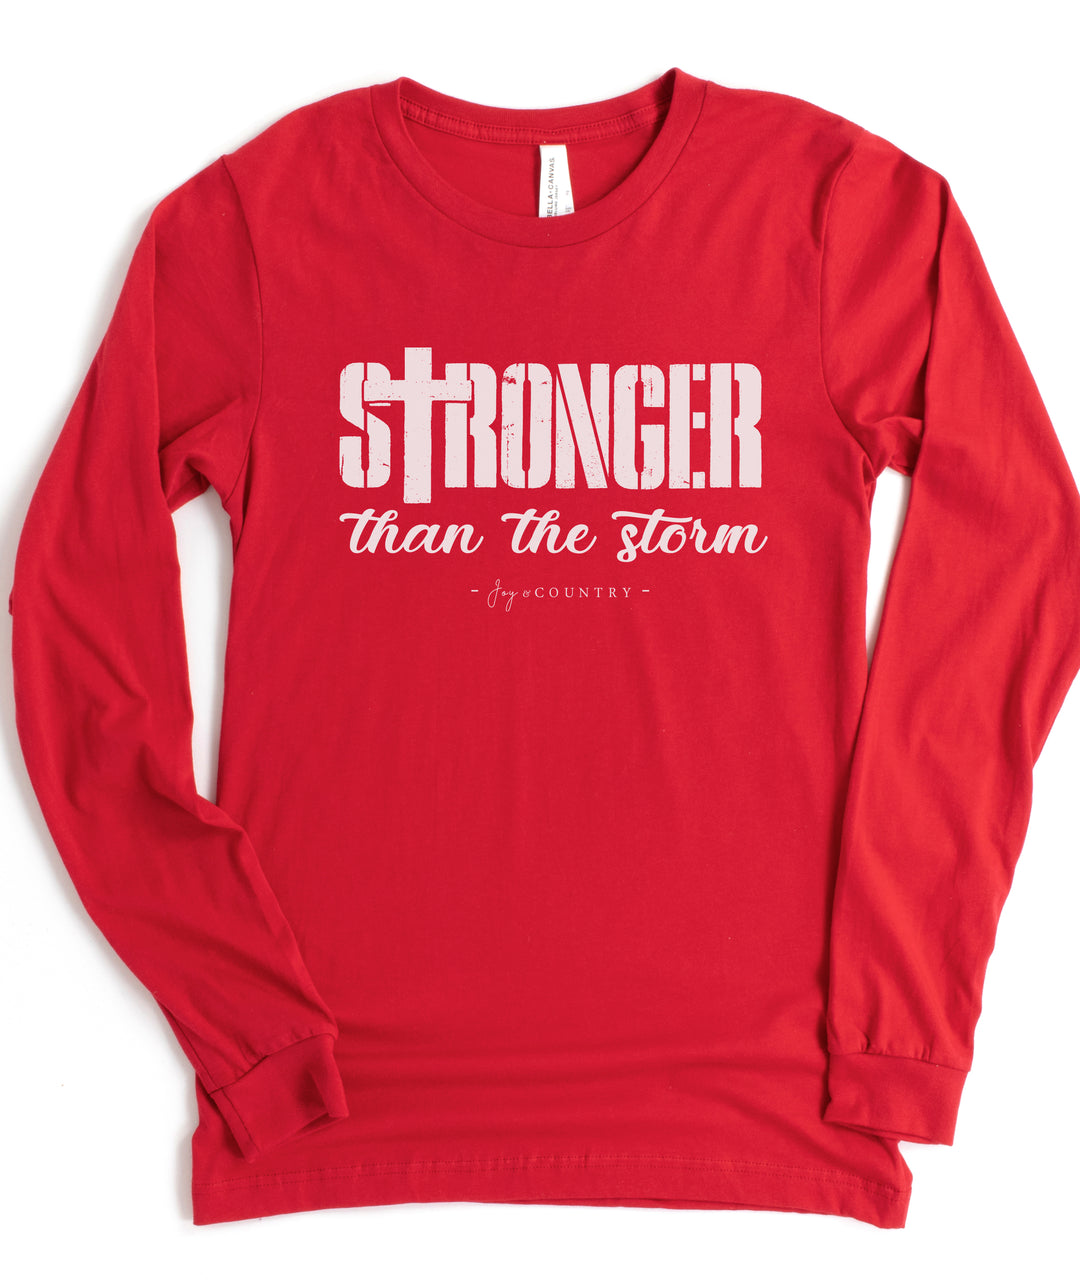 Stronger Than The Storm - Unisex Long-Sleeve Tee